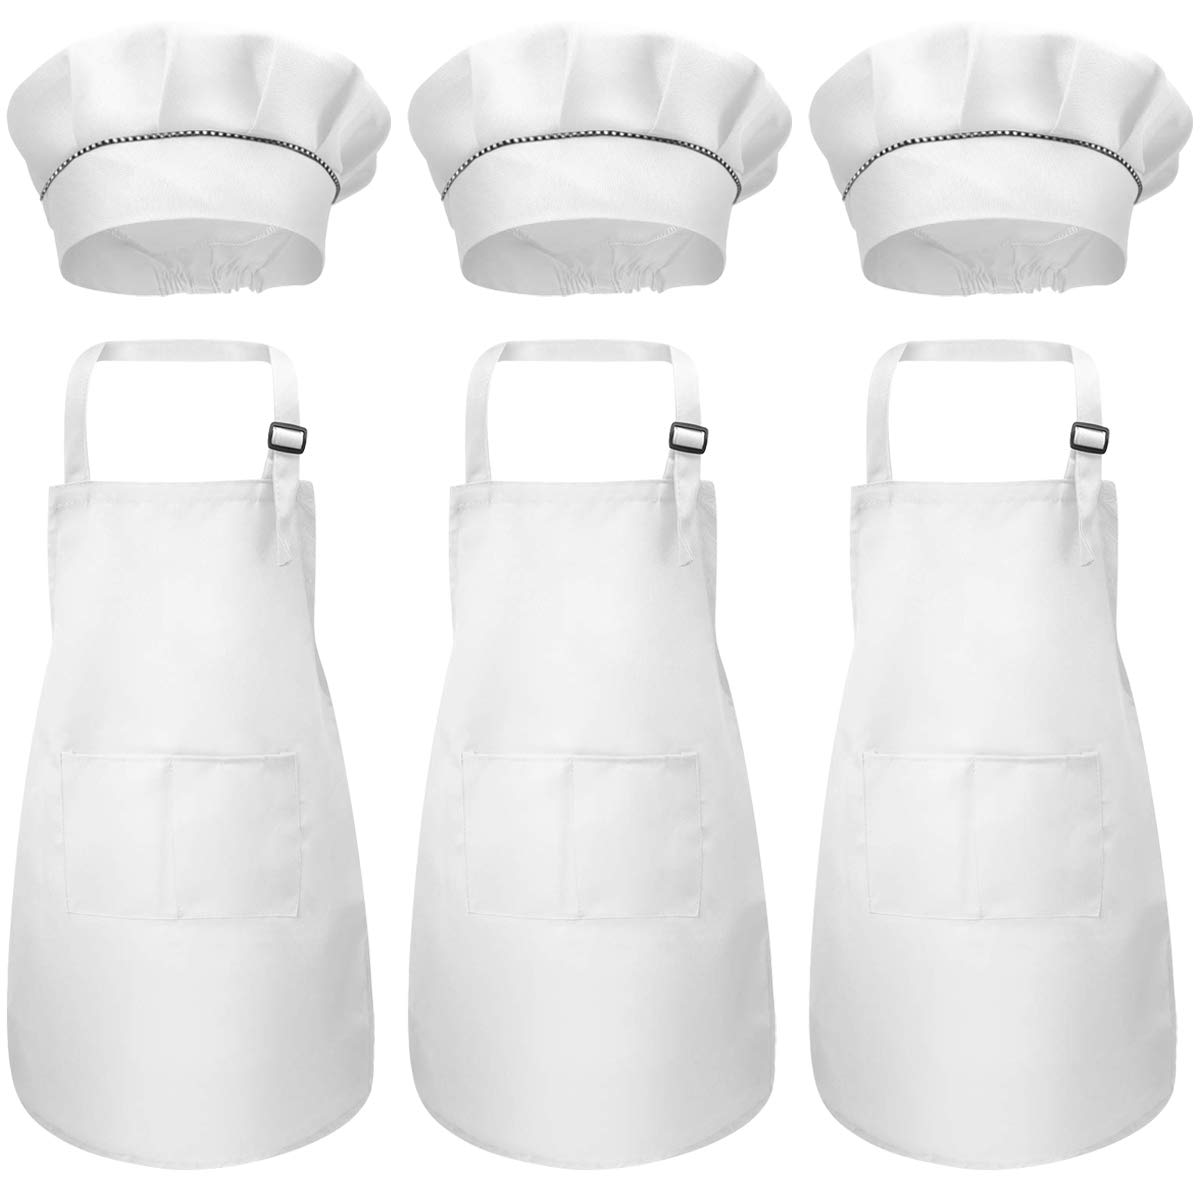 6Pcs Kids Apron and Chef Hat Set, Children Chef Aprons with Pockets, Boys Girls Adjustable Kitchen Garden Bib Aprons, Toddler Cooking Aprons for Crafting Painting Baking (7-13 Year) (White)